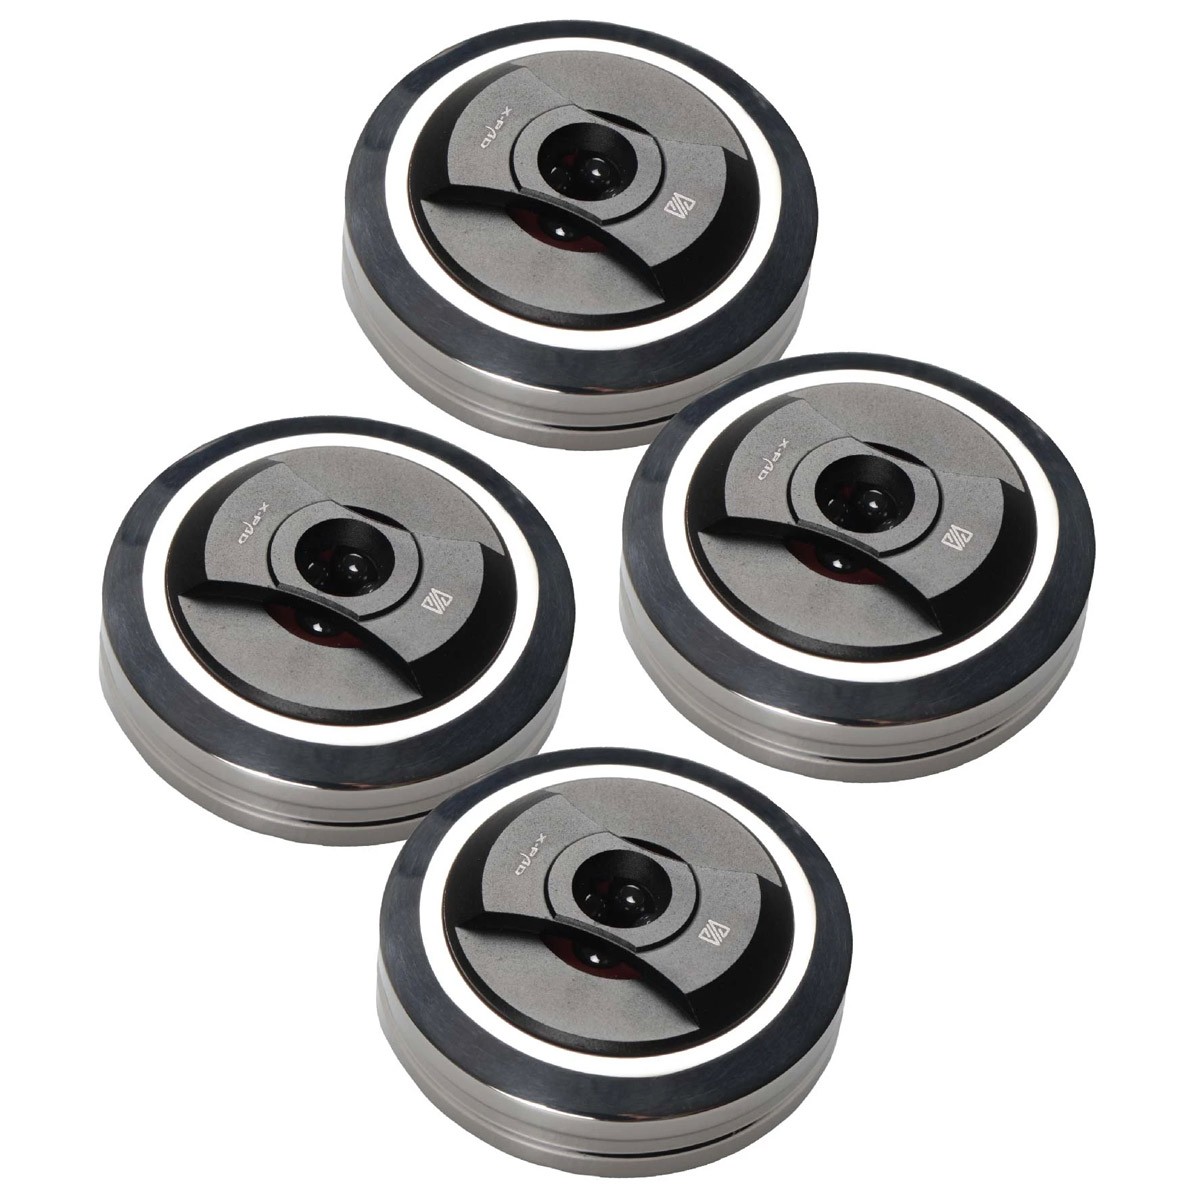 AUDIO BASTION X-PAD REF Speakers Spike Pads Shoes Aluminum Stainless Steel Ø50mm (Set x4)